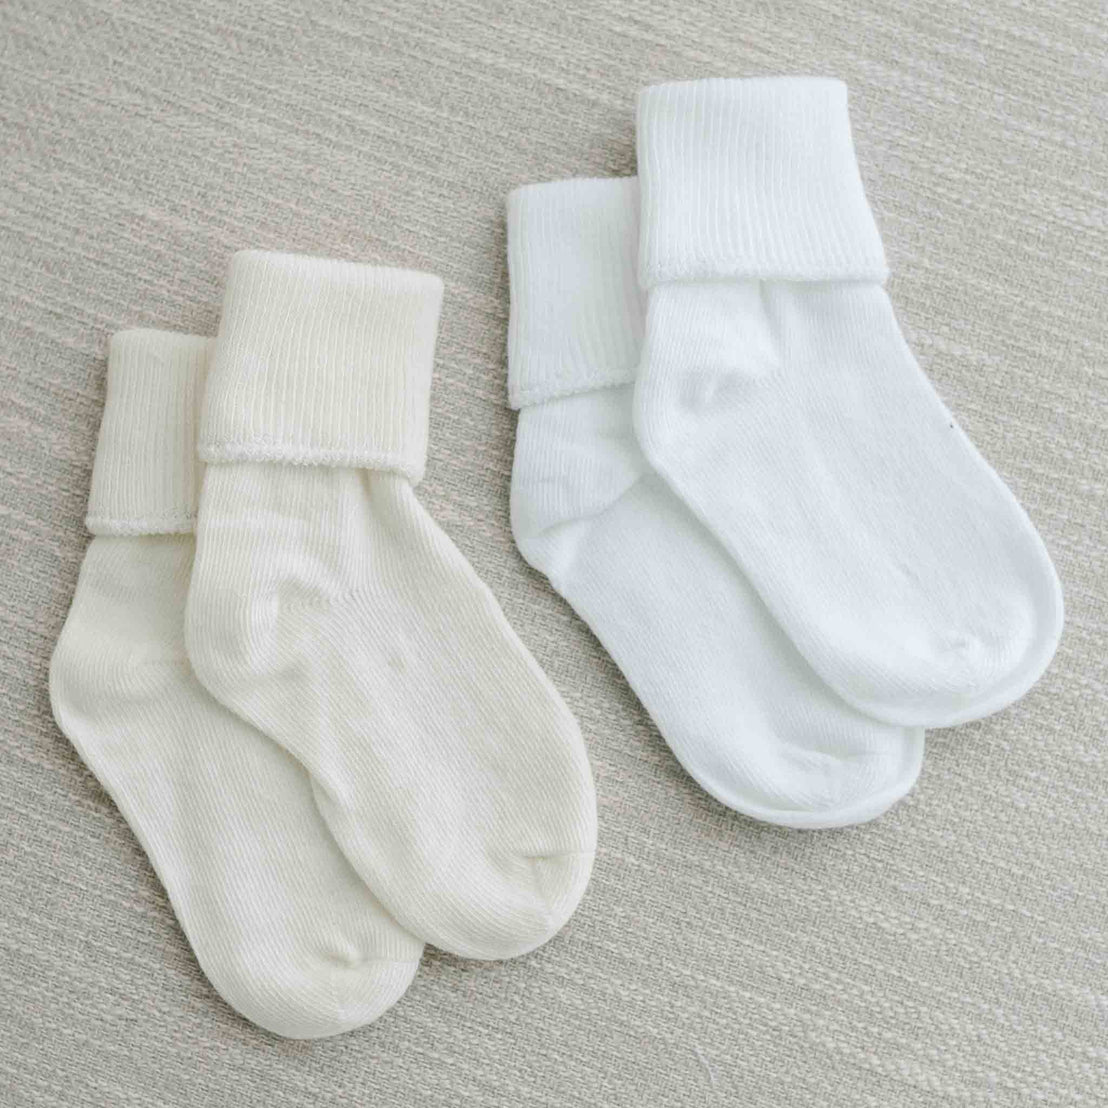 Two pairs of Boys Simple Socks, one pair in ivory and another in white, neatly laid out on a soft beige fabric background.